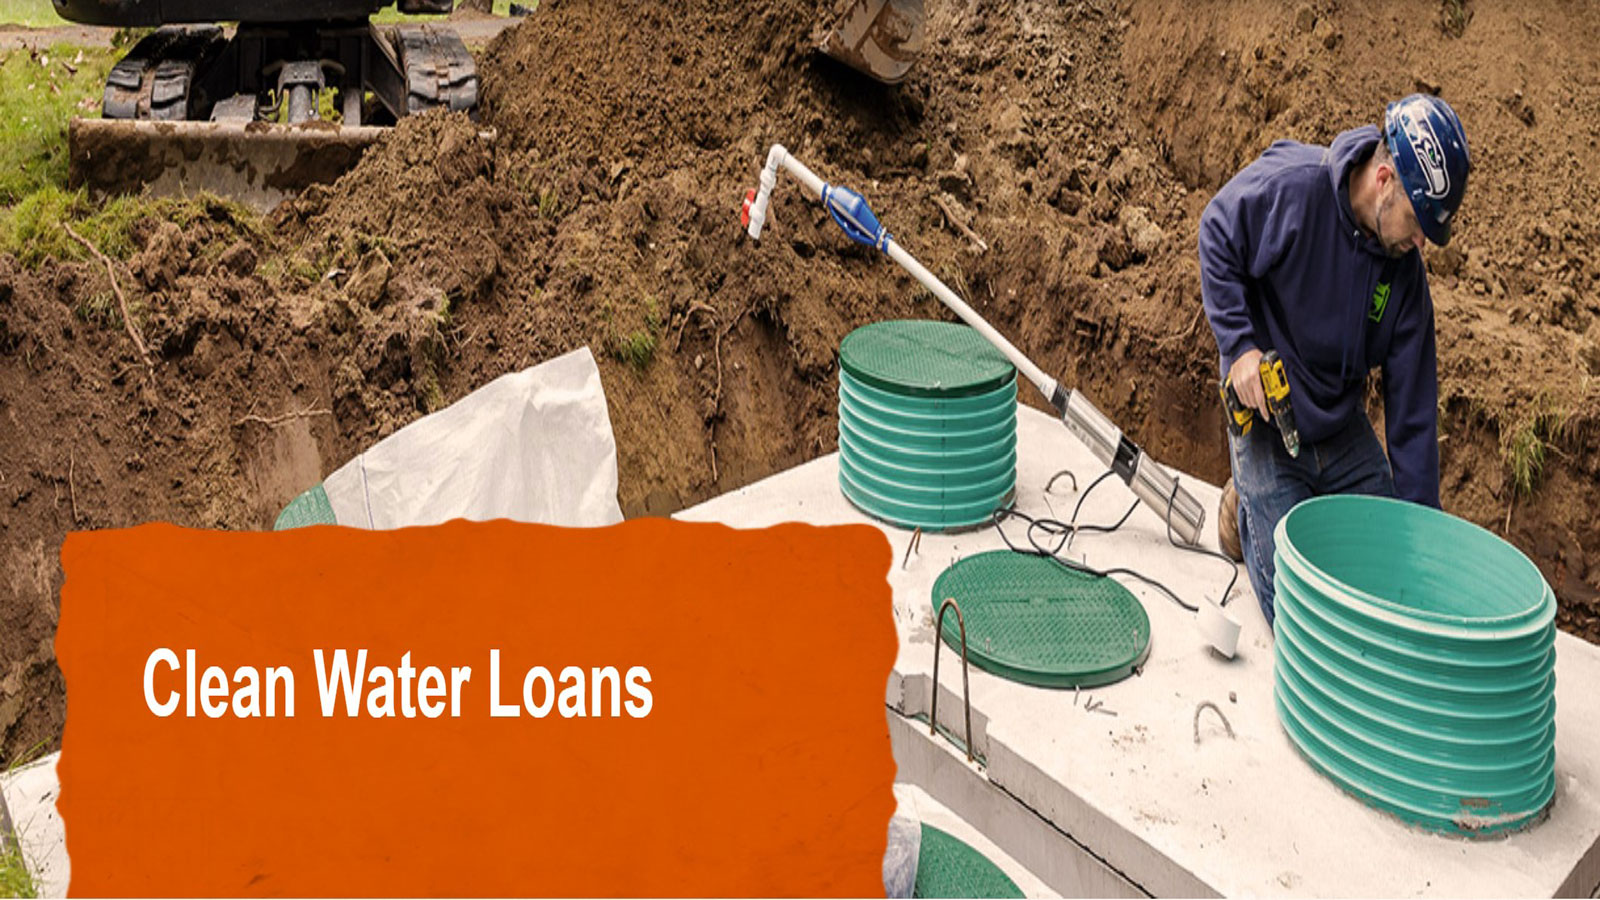 Loans for septic repairs, replacement now available to Chelan County